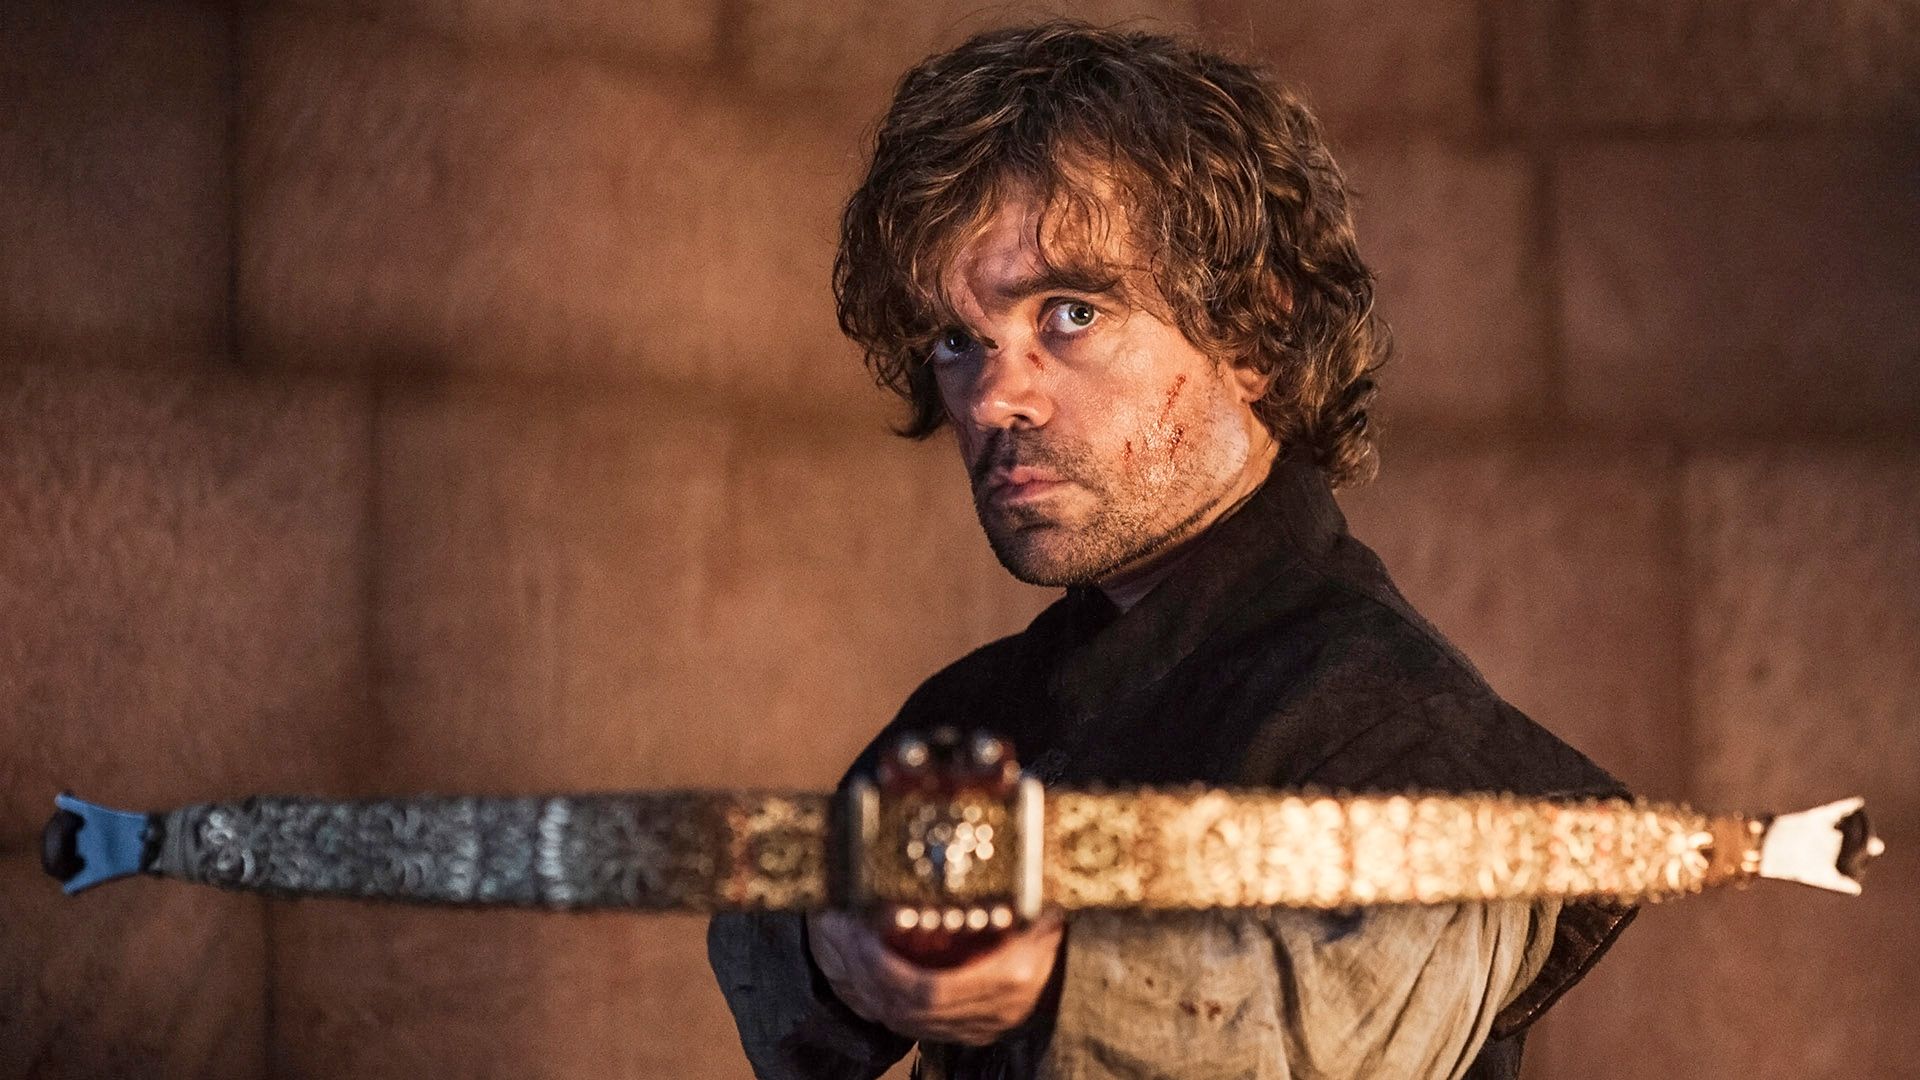 Tyrion with Crossbow in Game of Thrones